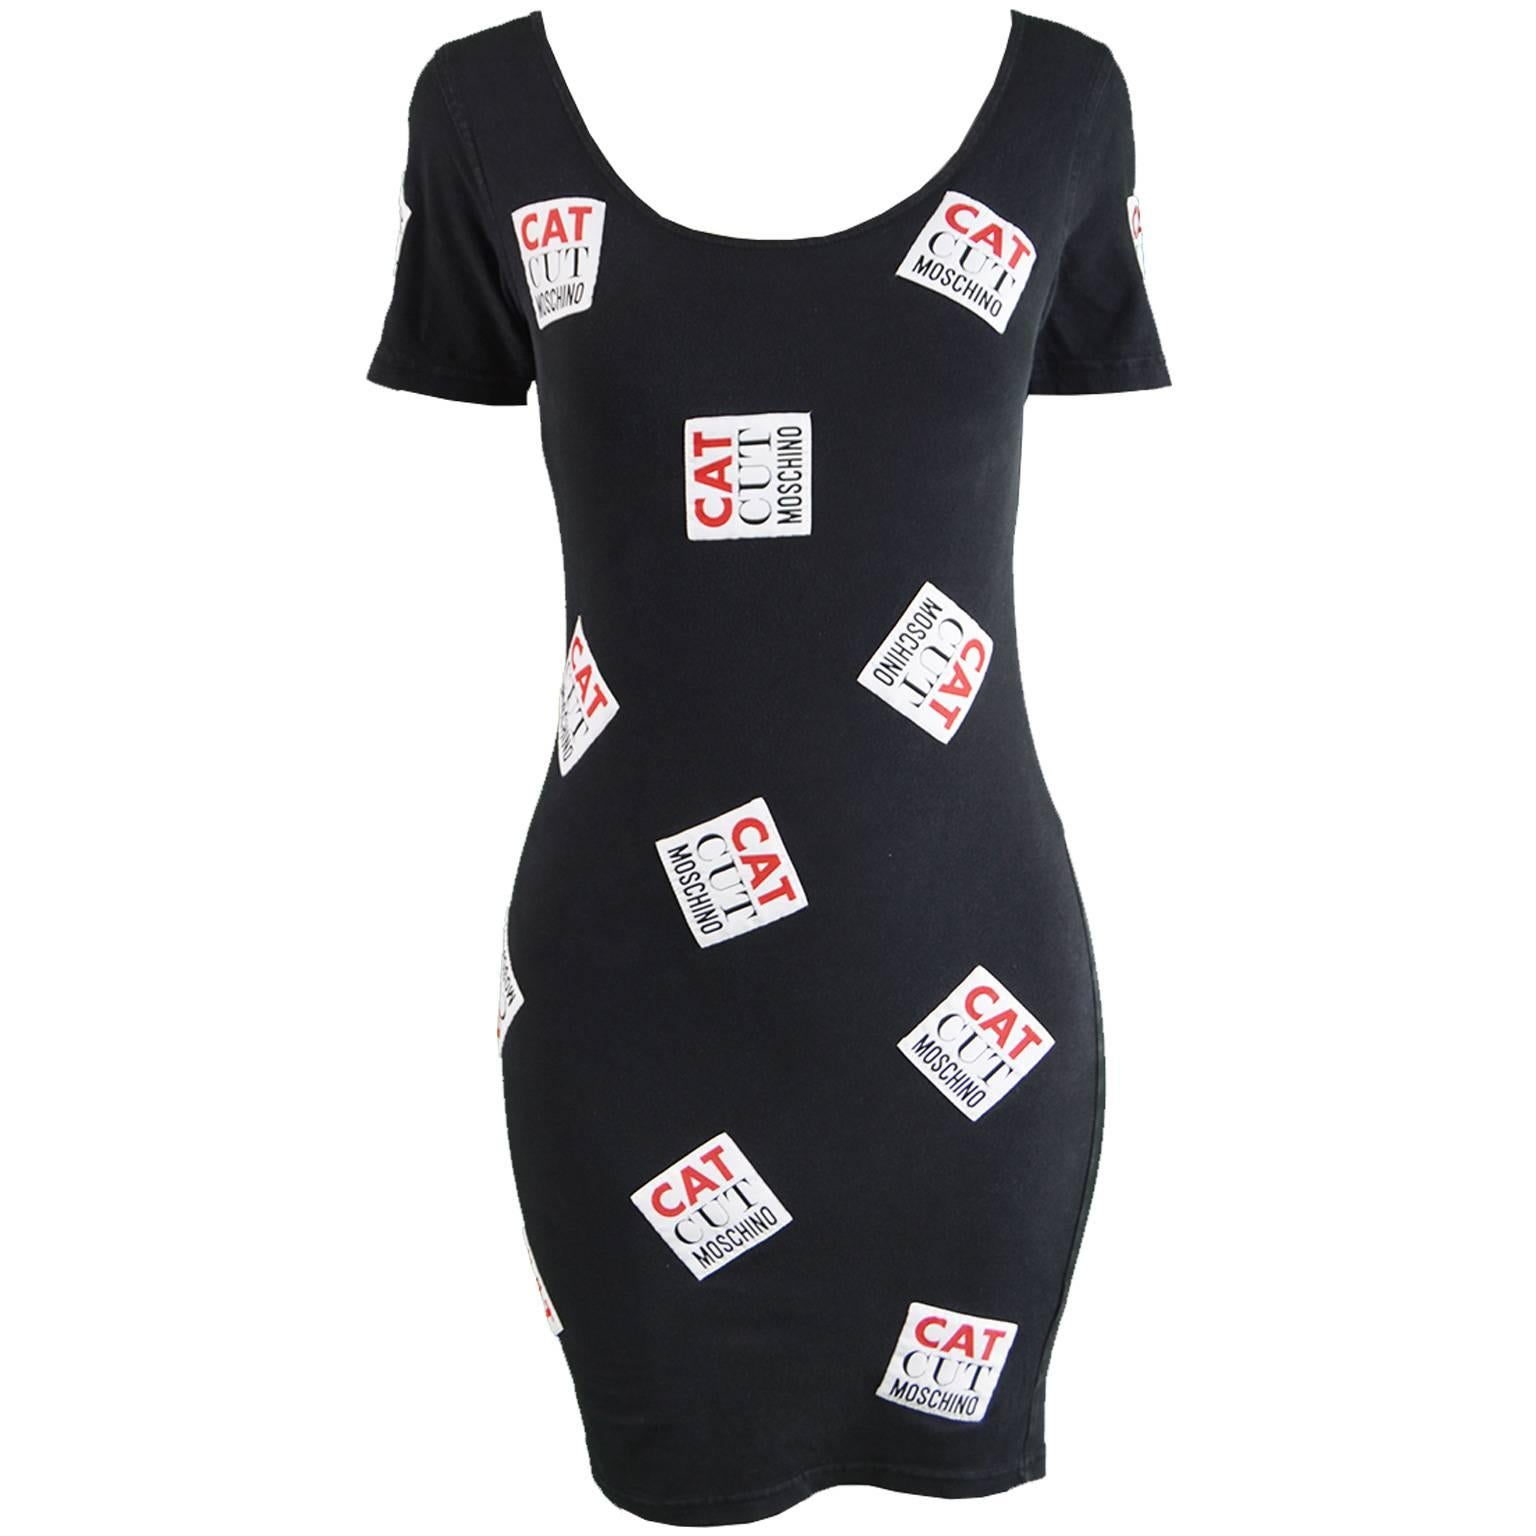 Moschino Vintage 'Cat Cut Moschino' Patch Bodycon Dress, 1990s  For Sale